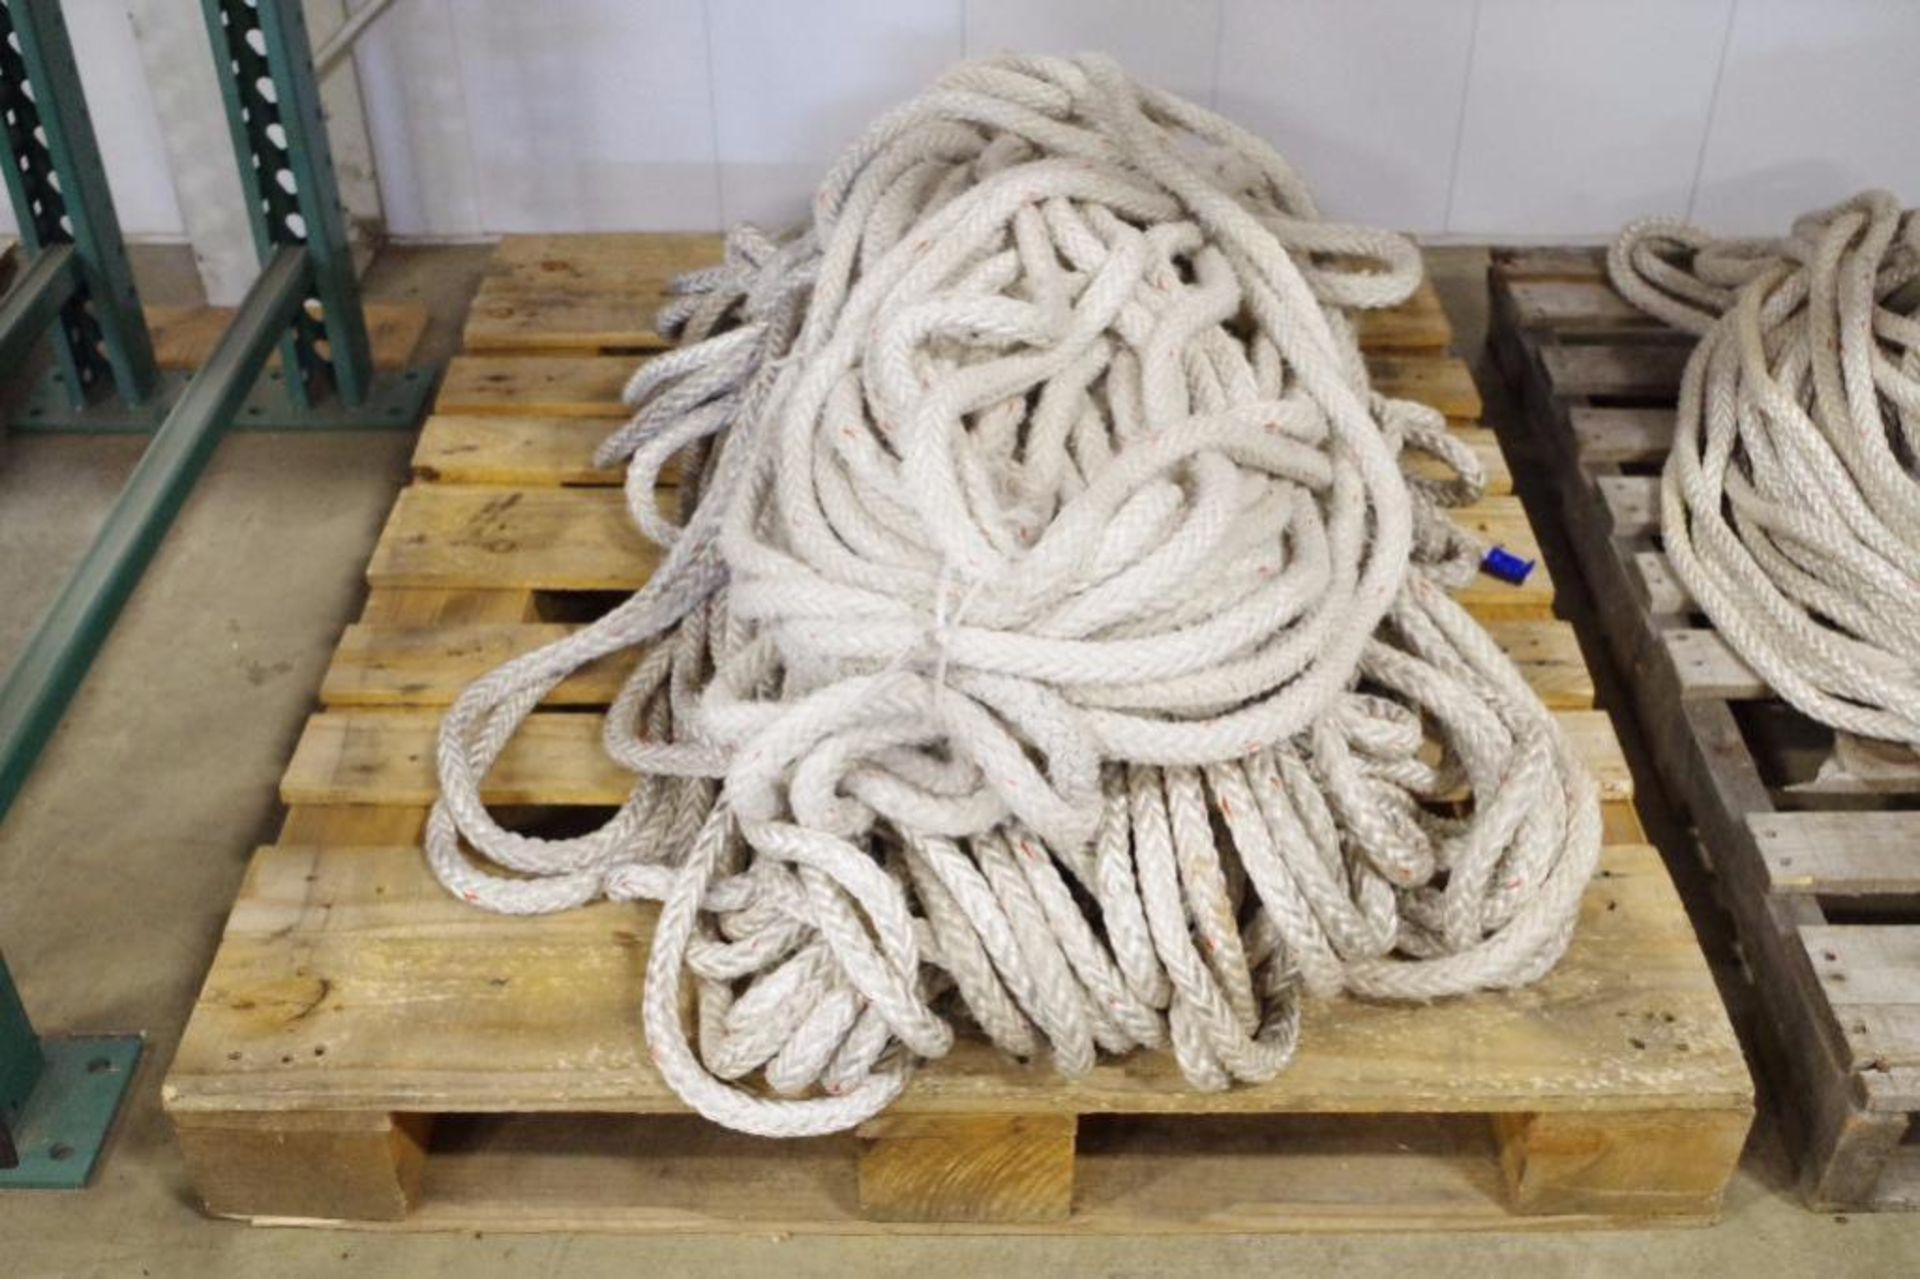 [QTY] Rope, 3/4" or 7/8", At least two sections of rope